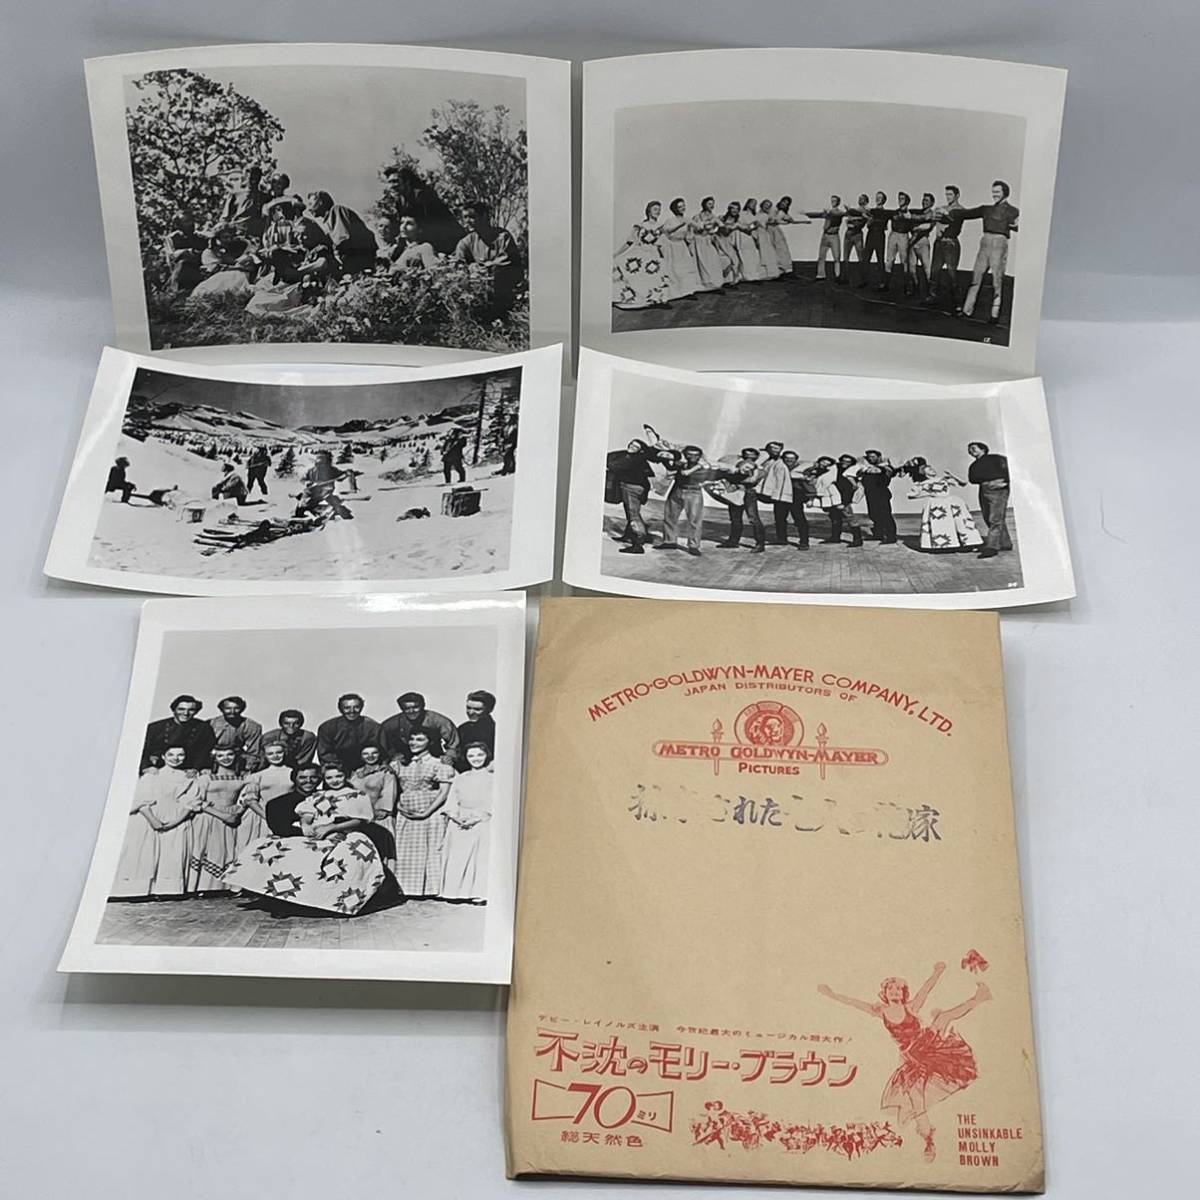 ★Very rare★ Movie Seven Brides Snatched / Still photo set / Photo / No color / Showa retro / Original / Not for sale / Envelope included Hard to find, movie, video, Movie related goods, photograph